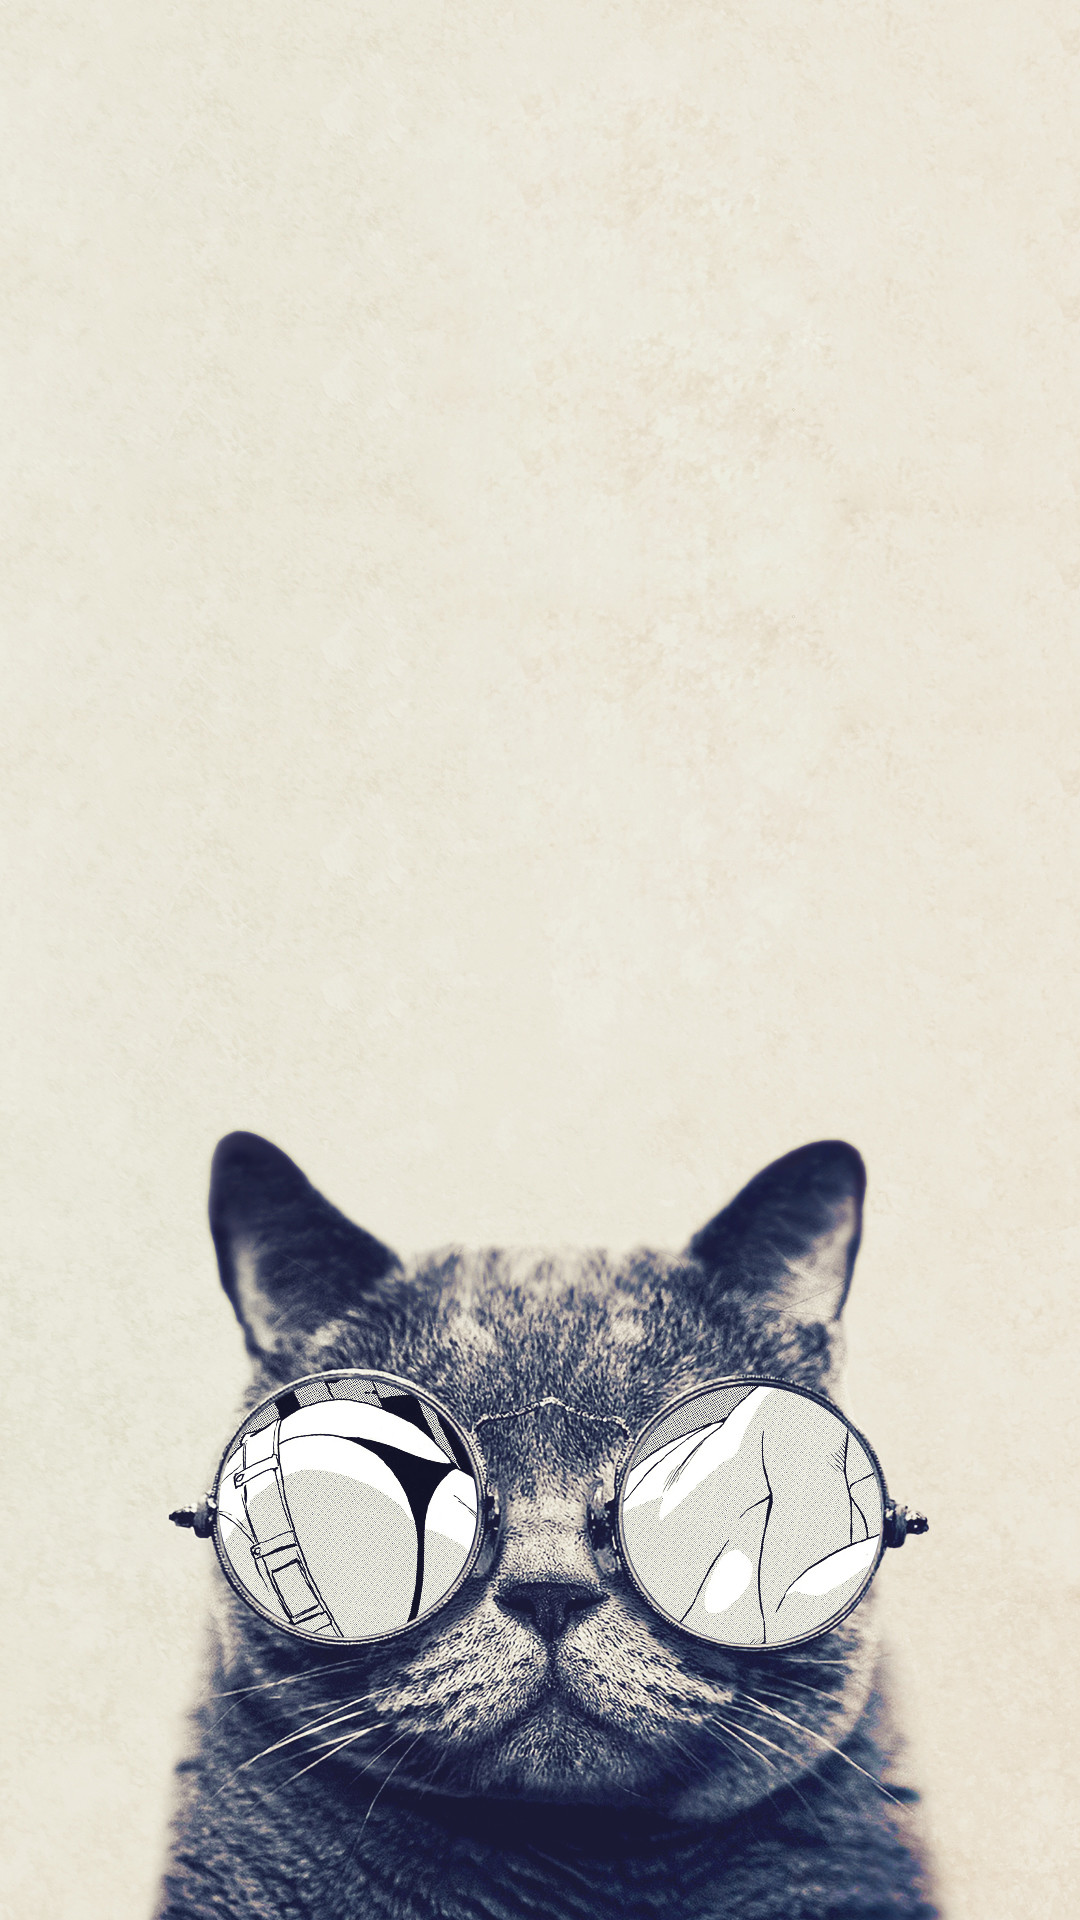 1080x1920 Cat glasses HTC hd wallpaper - High quality htc one wallpapers and abstract  backgrounds designed by the best and creative artists in the world.